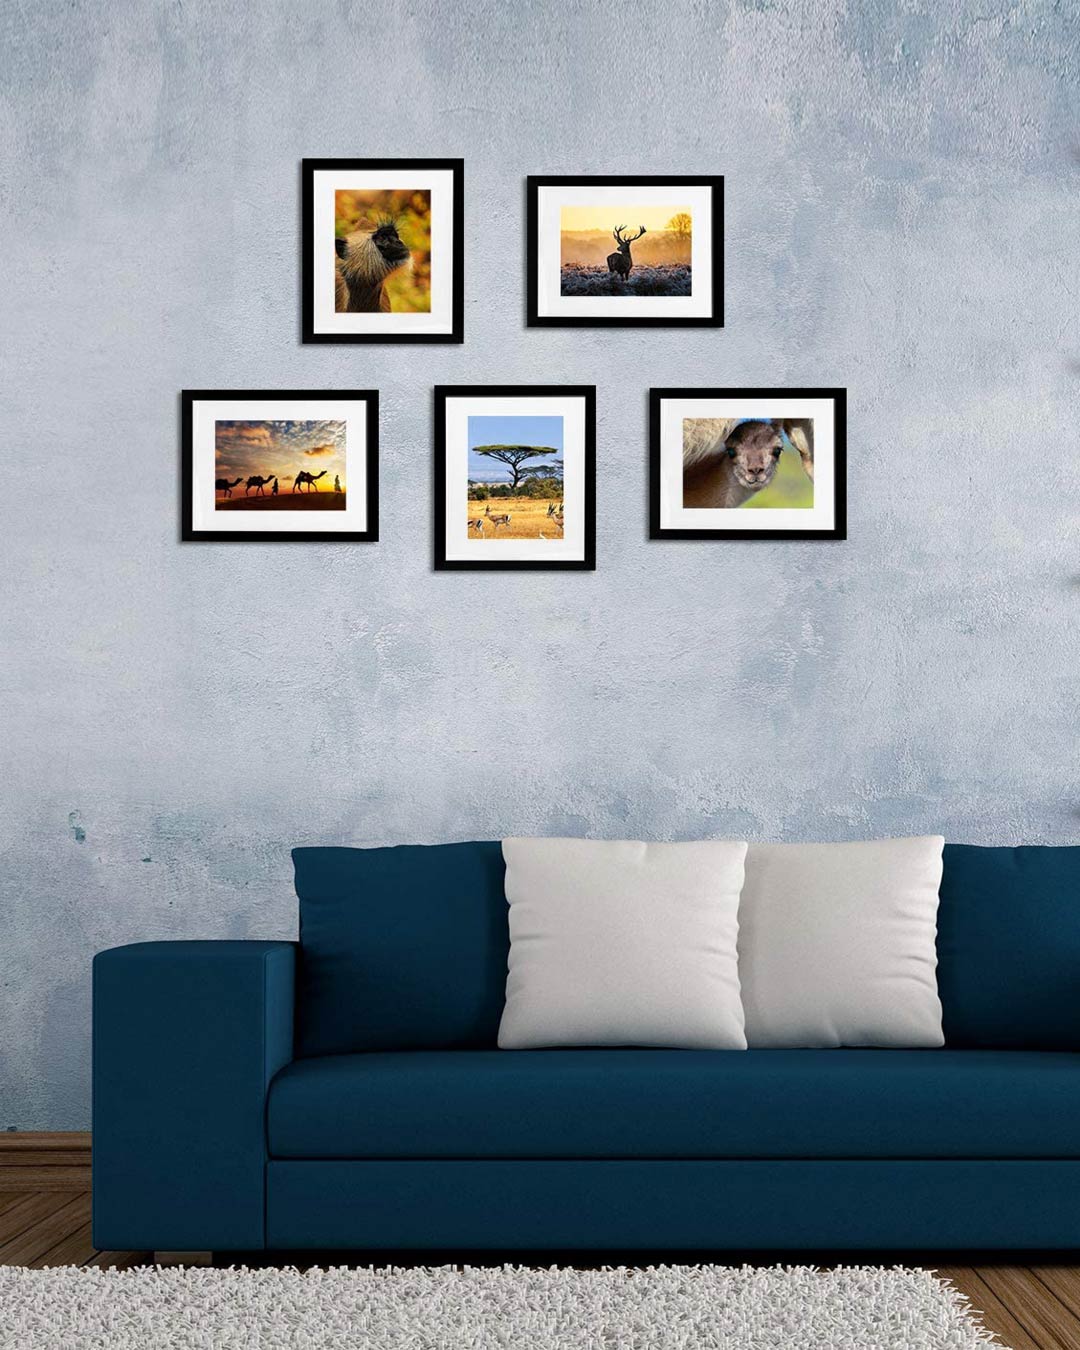 wedding-registry ideas pictures frames wall decor